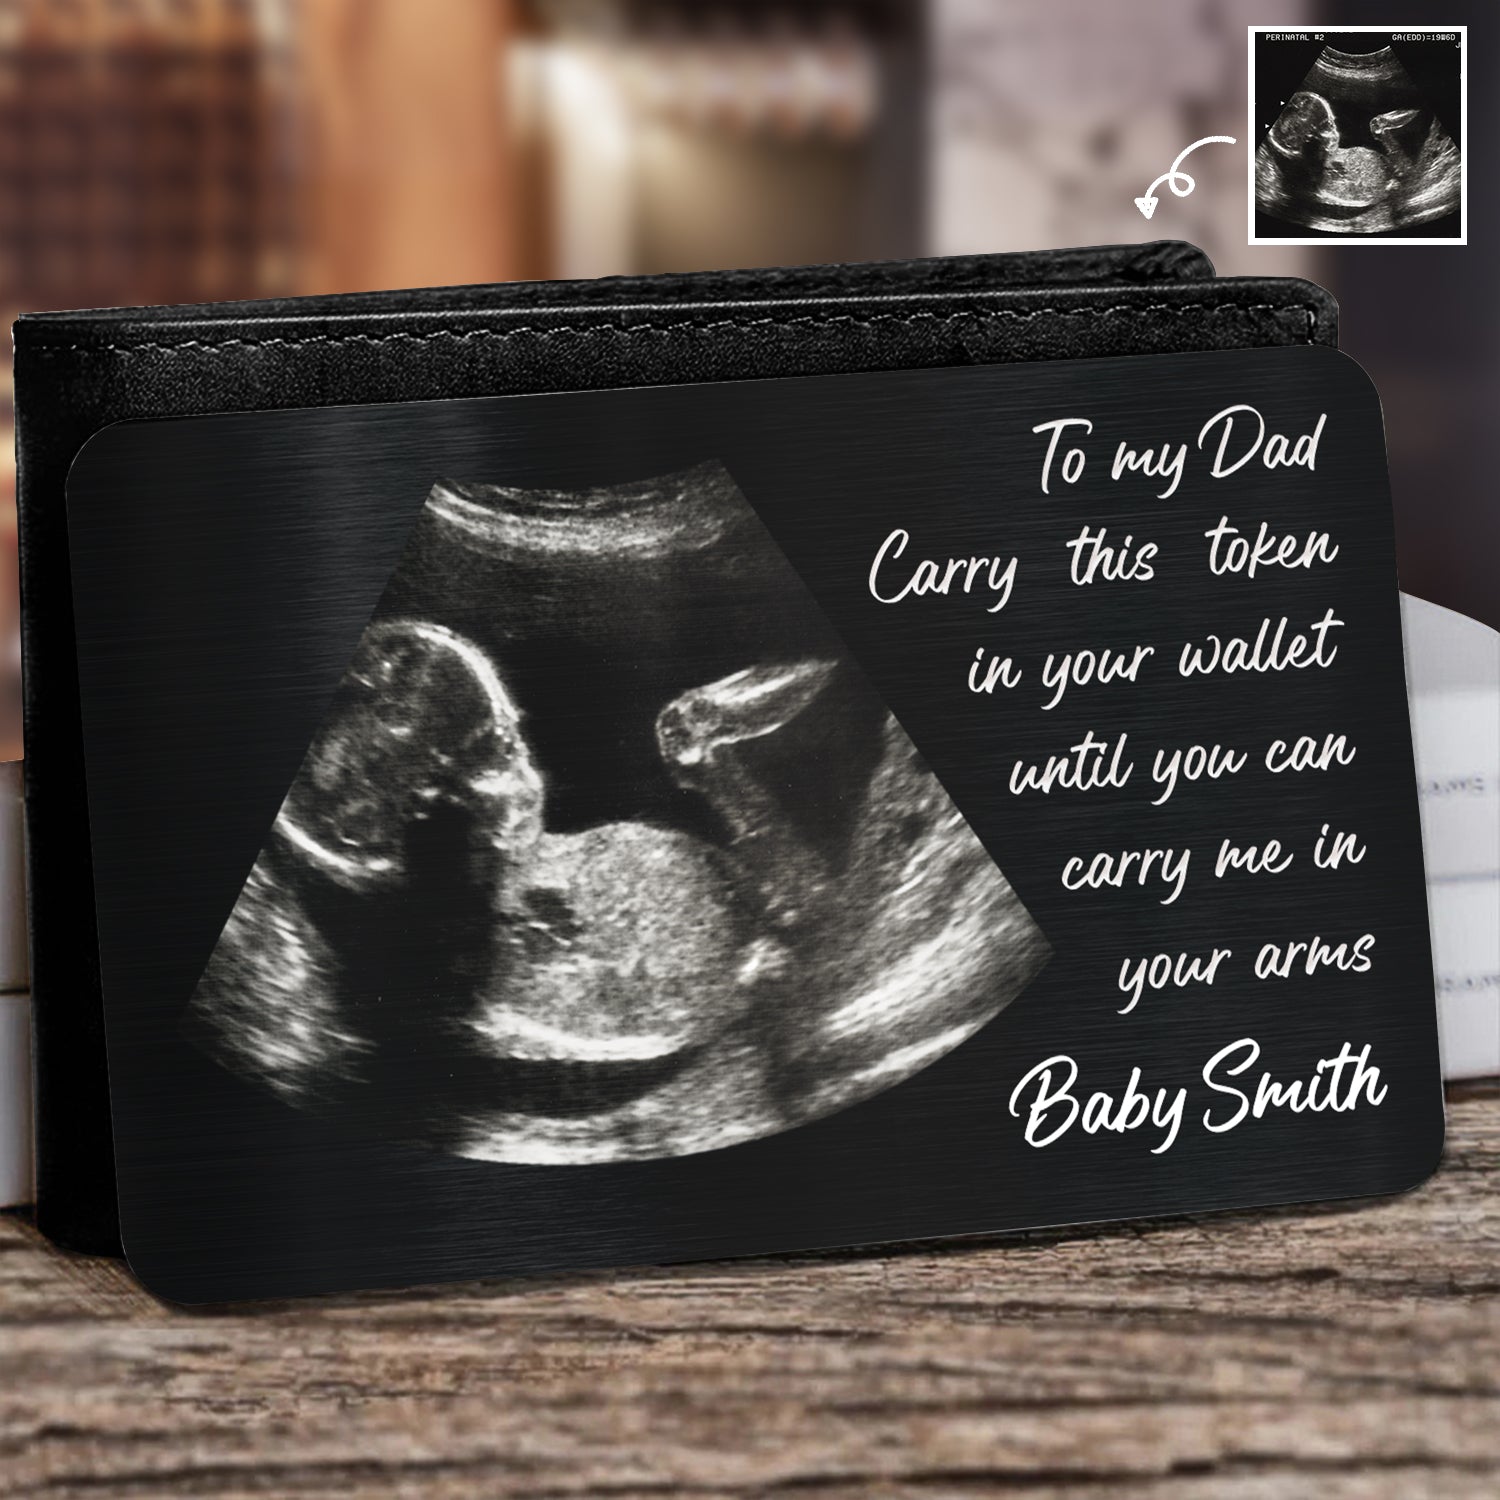 Custom Photo Until You Can Carry Me In Your Arms - Birthday, Loving Gift For Father, Dad-to-be - Personalized Aluminum Wallet Card